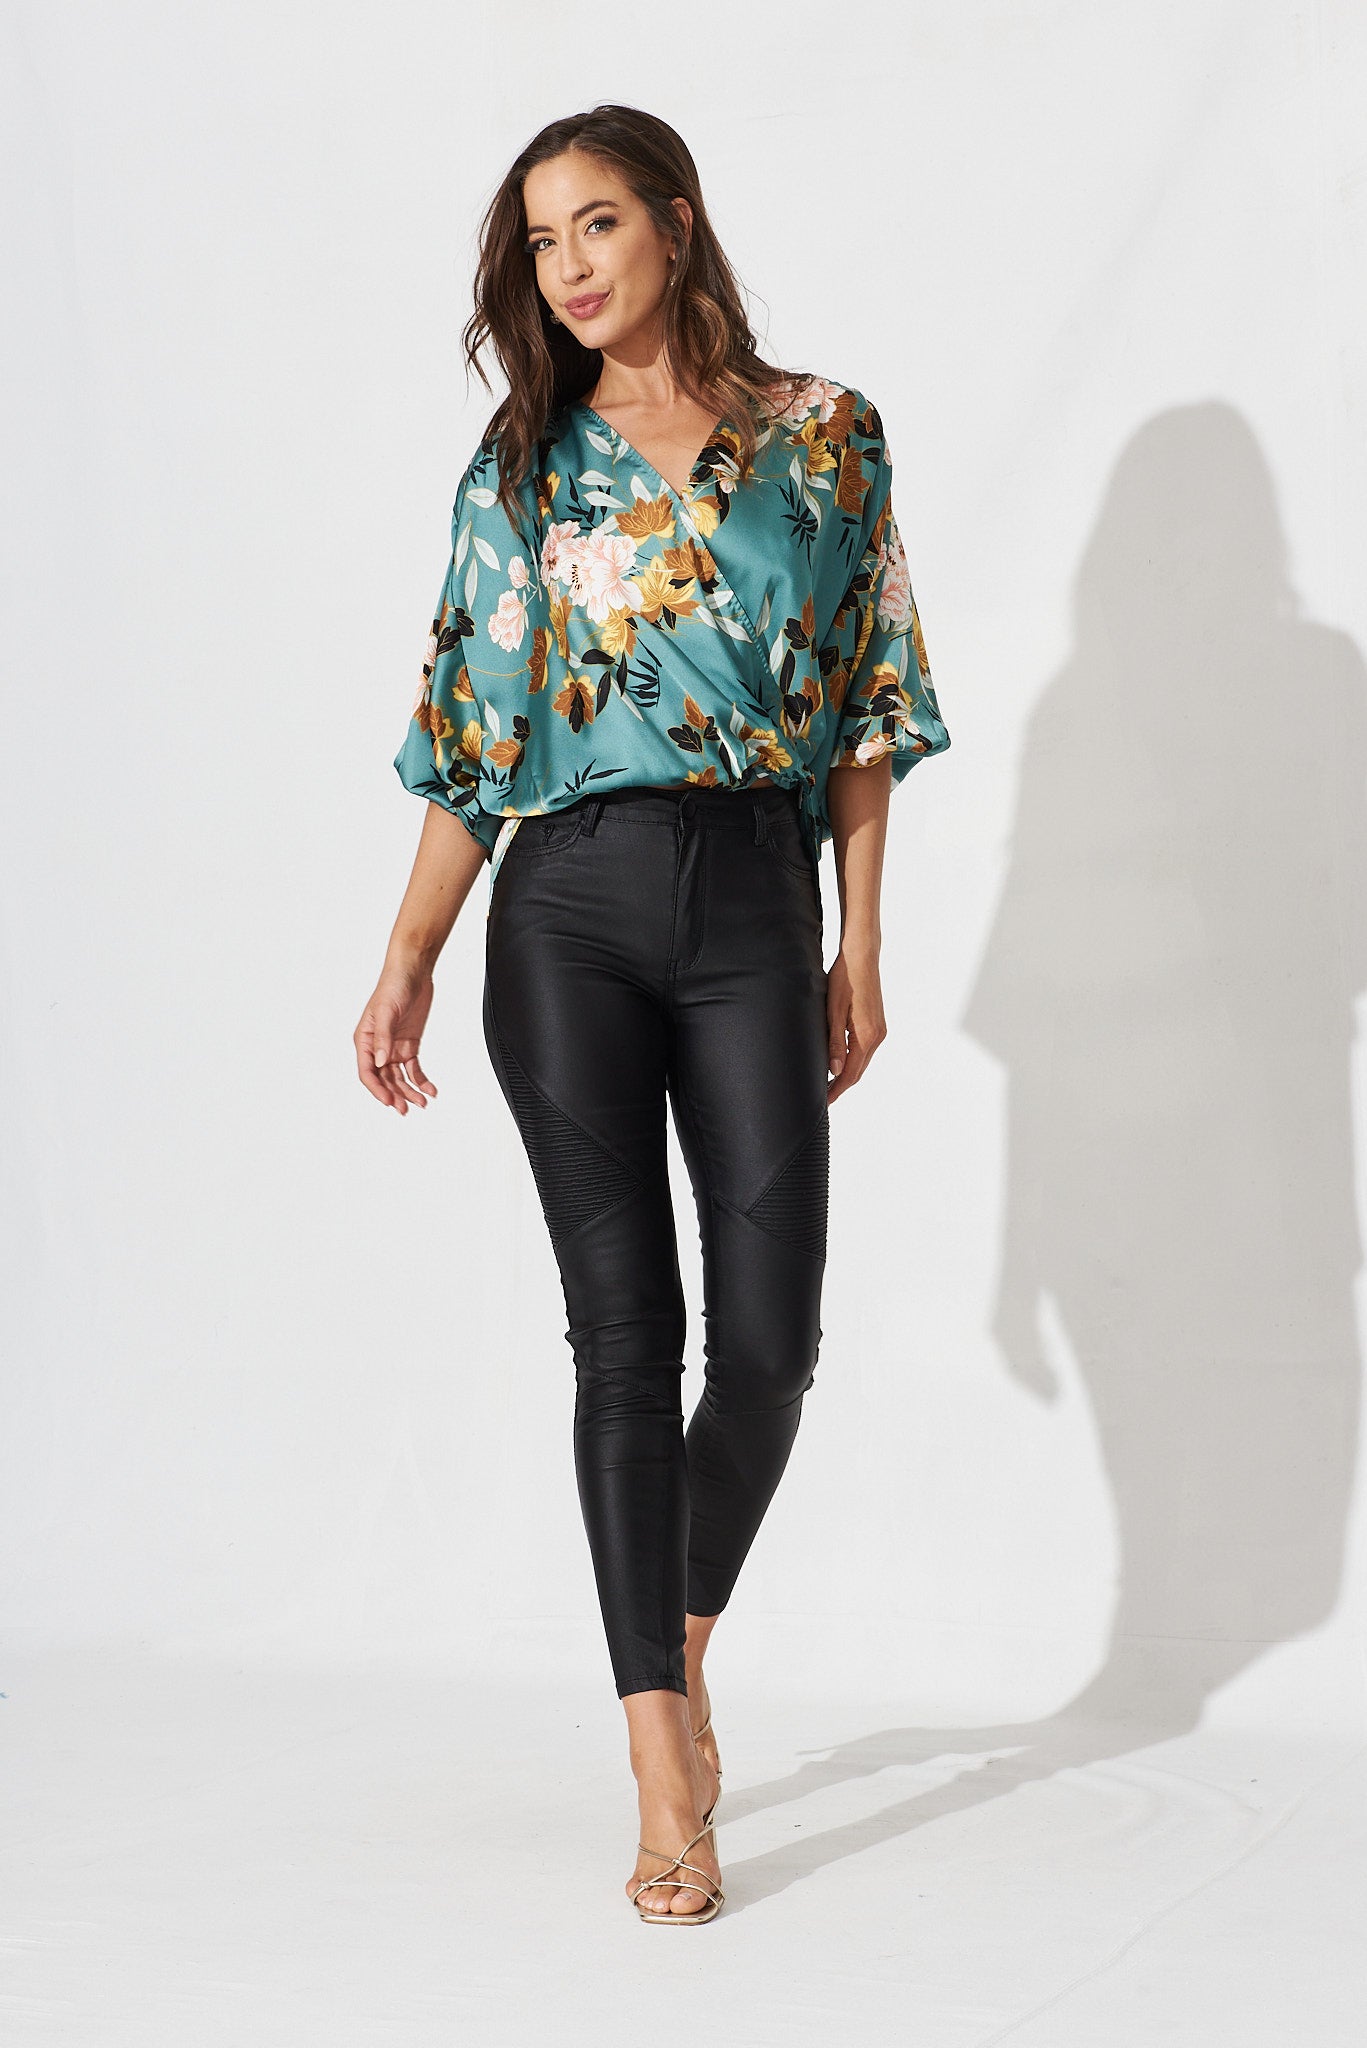 Solita Top In Green With Blush Floral Satin - full length